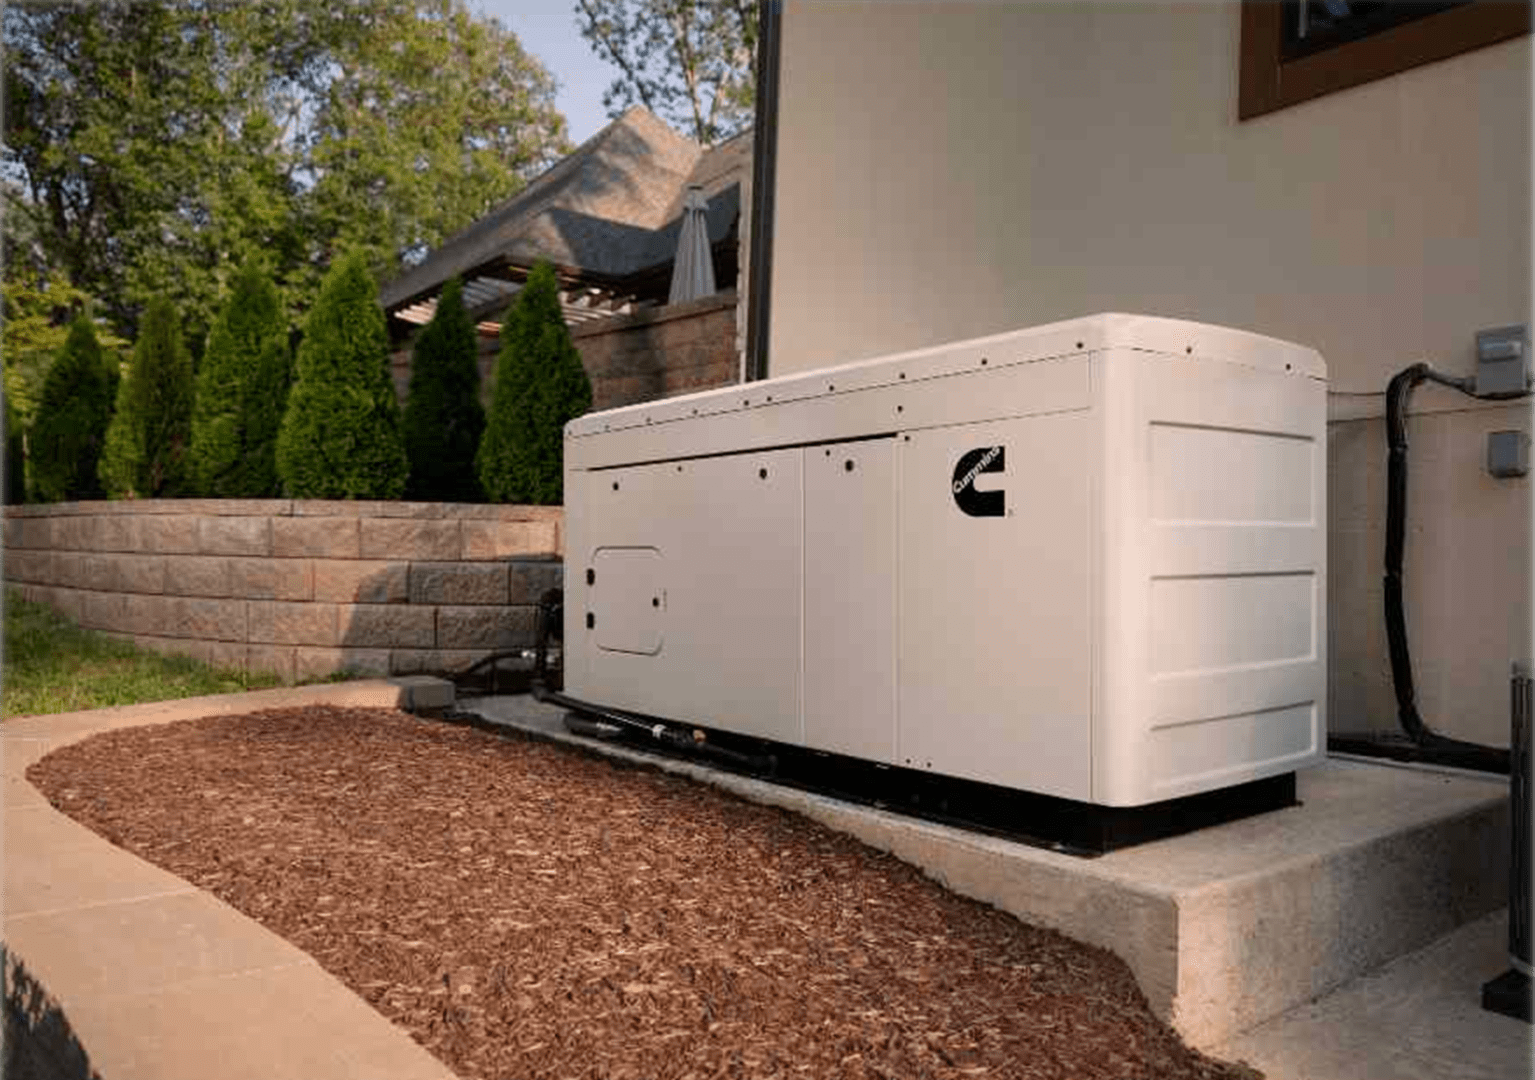 We rate and rank standby generators from Cummins including this 30kW liquid-cooled natural gas/propane generator